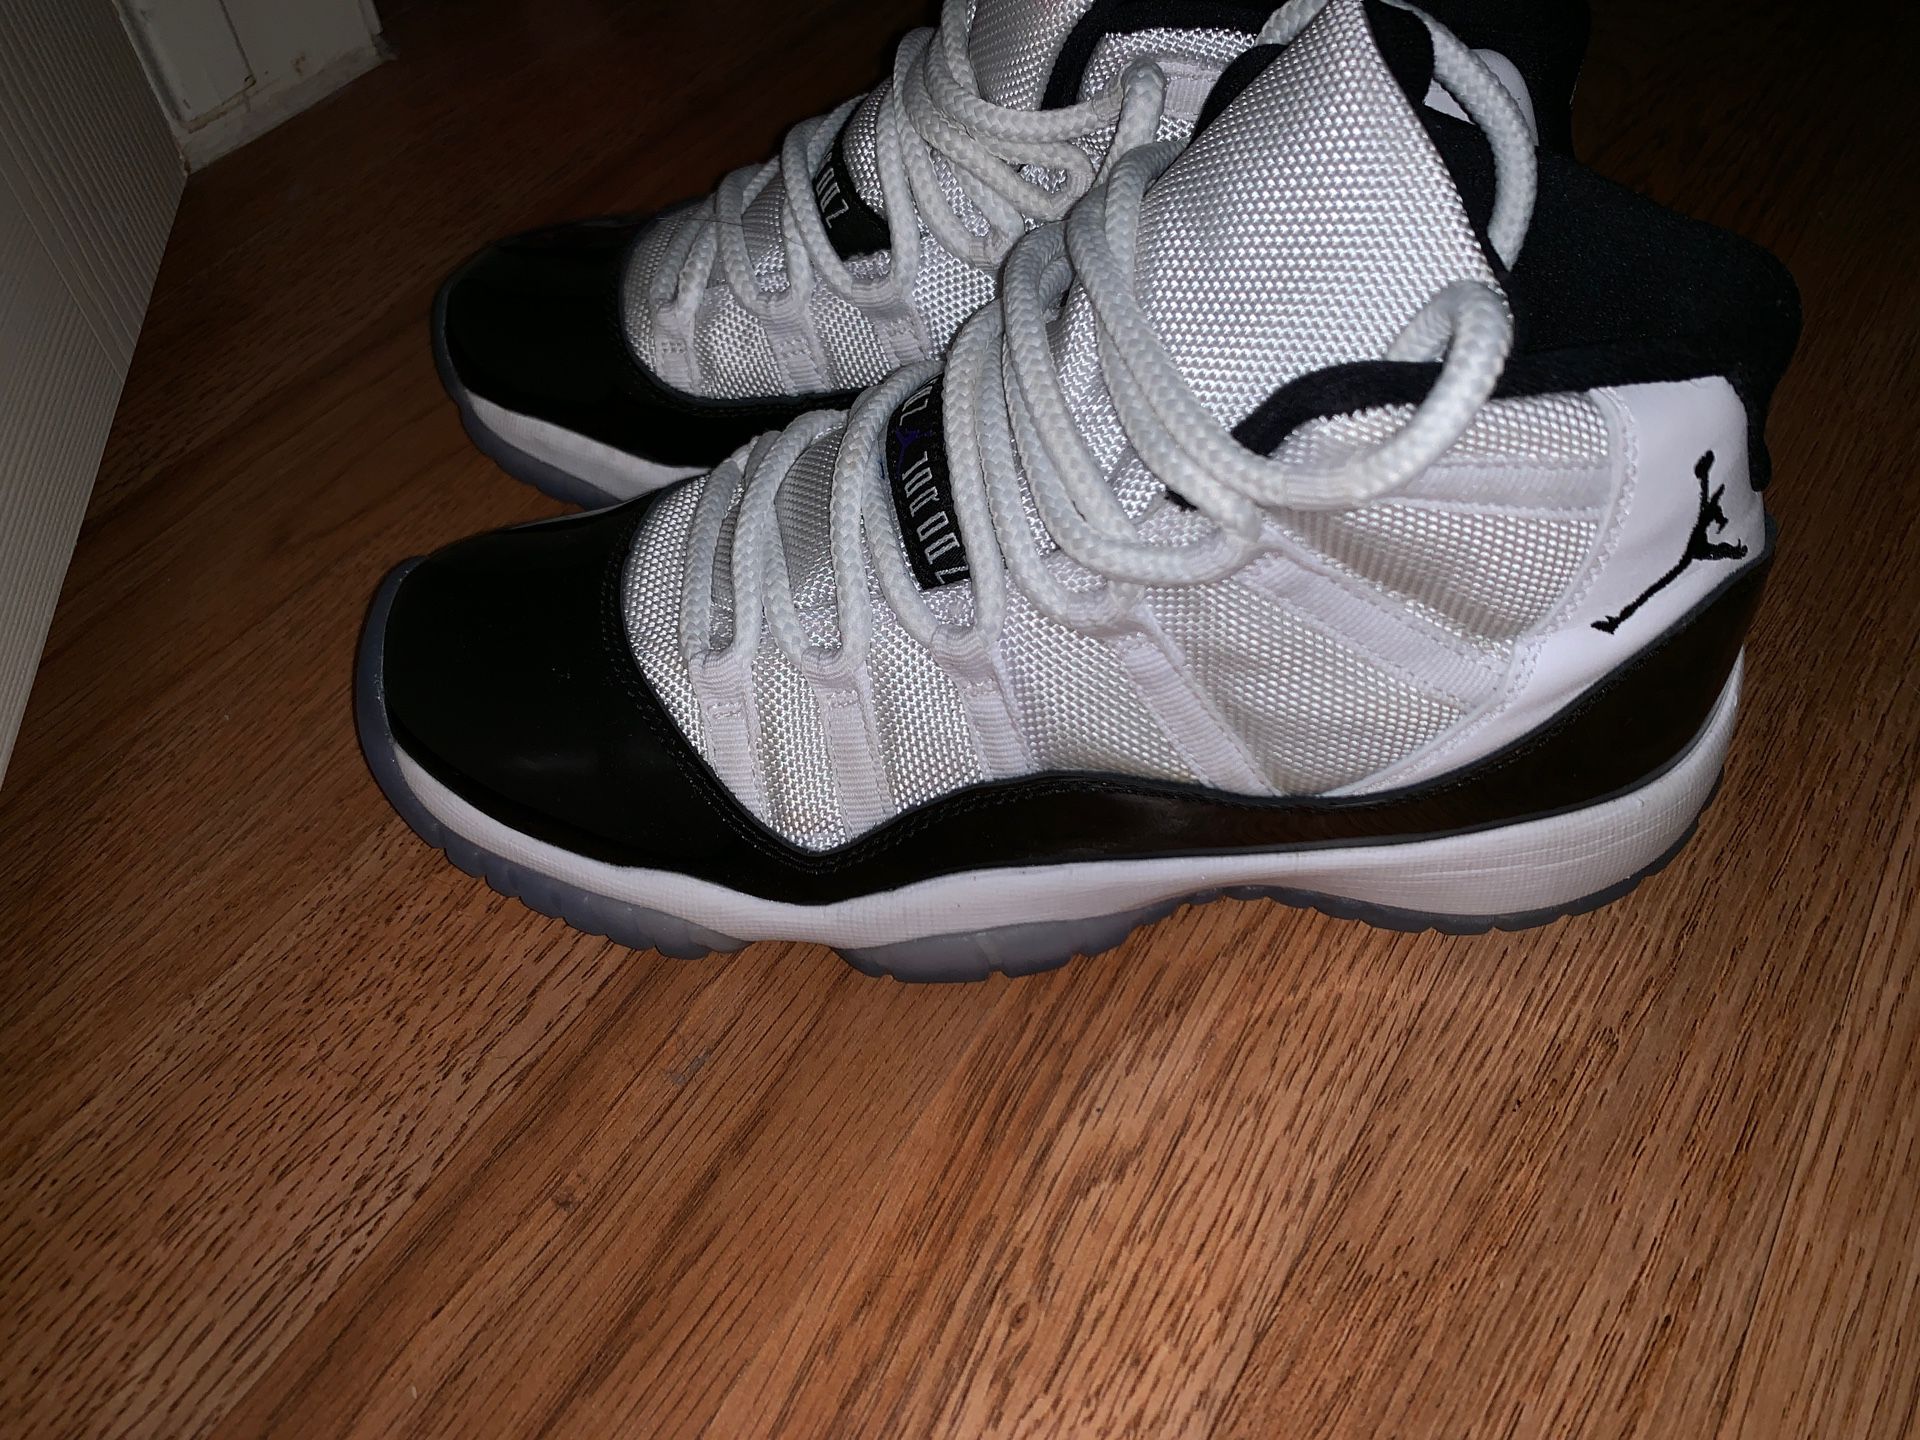 Jordan 11’s, 130$ size 5.5 used only twice.